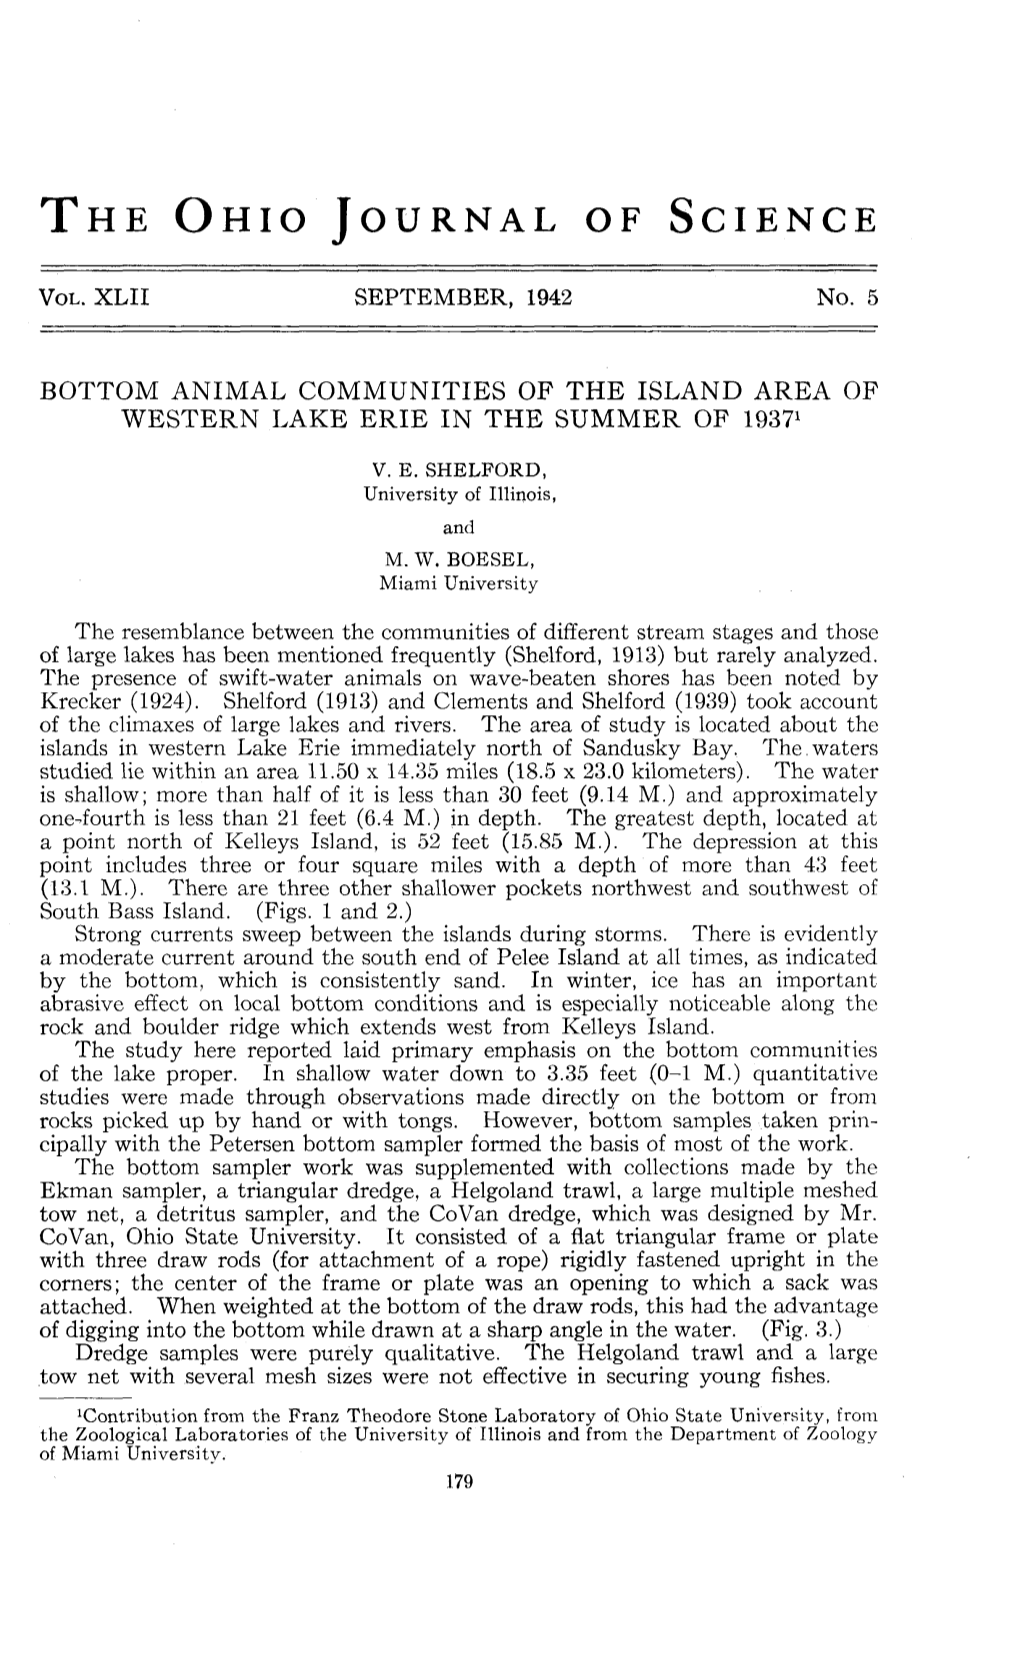 Bottom Animal Communities of the Island Area of Western Lake Erie in the Summer of 19371